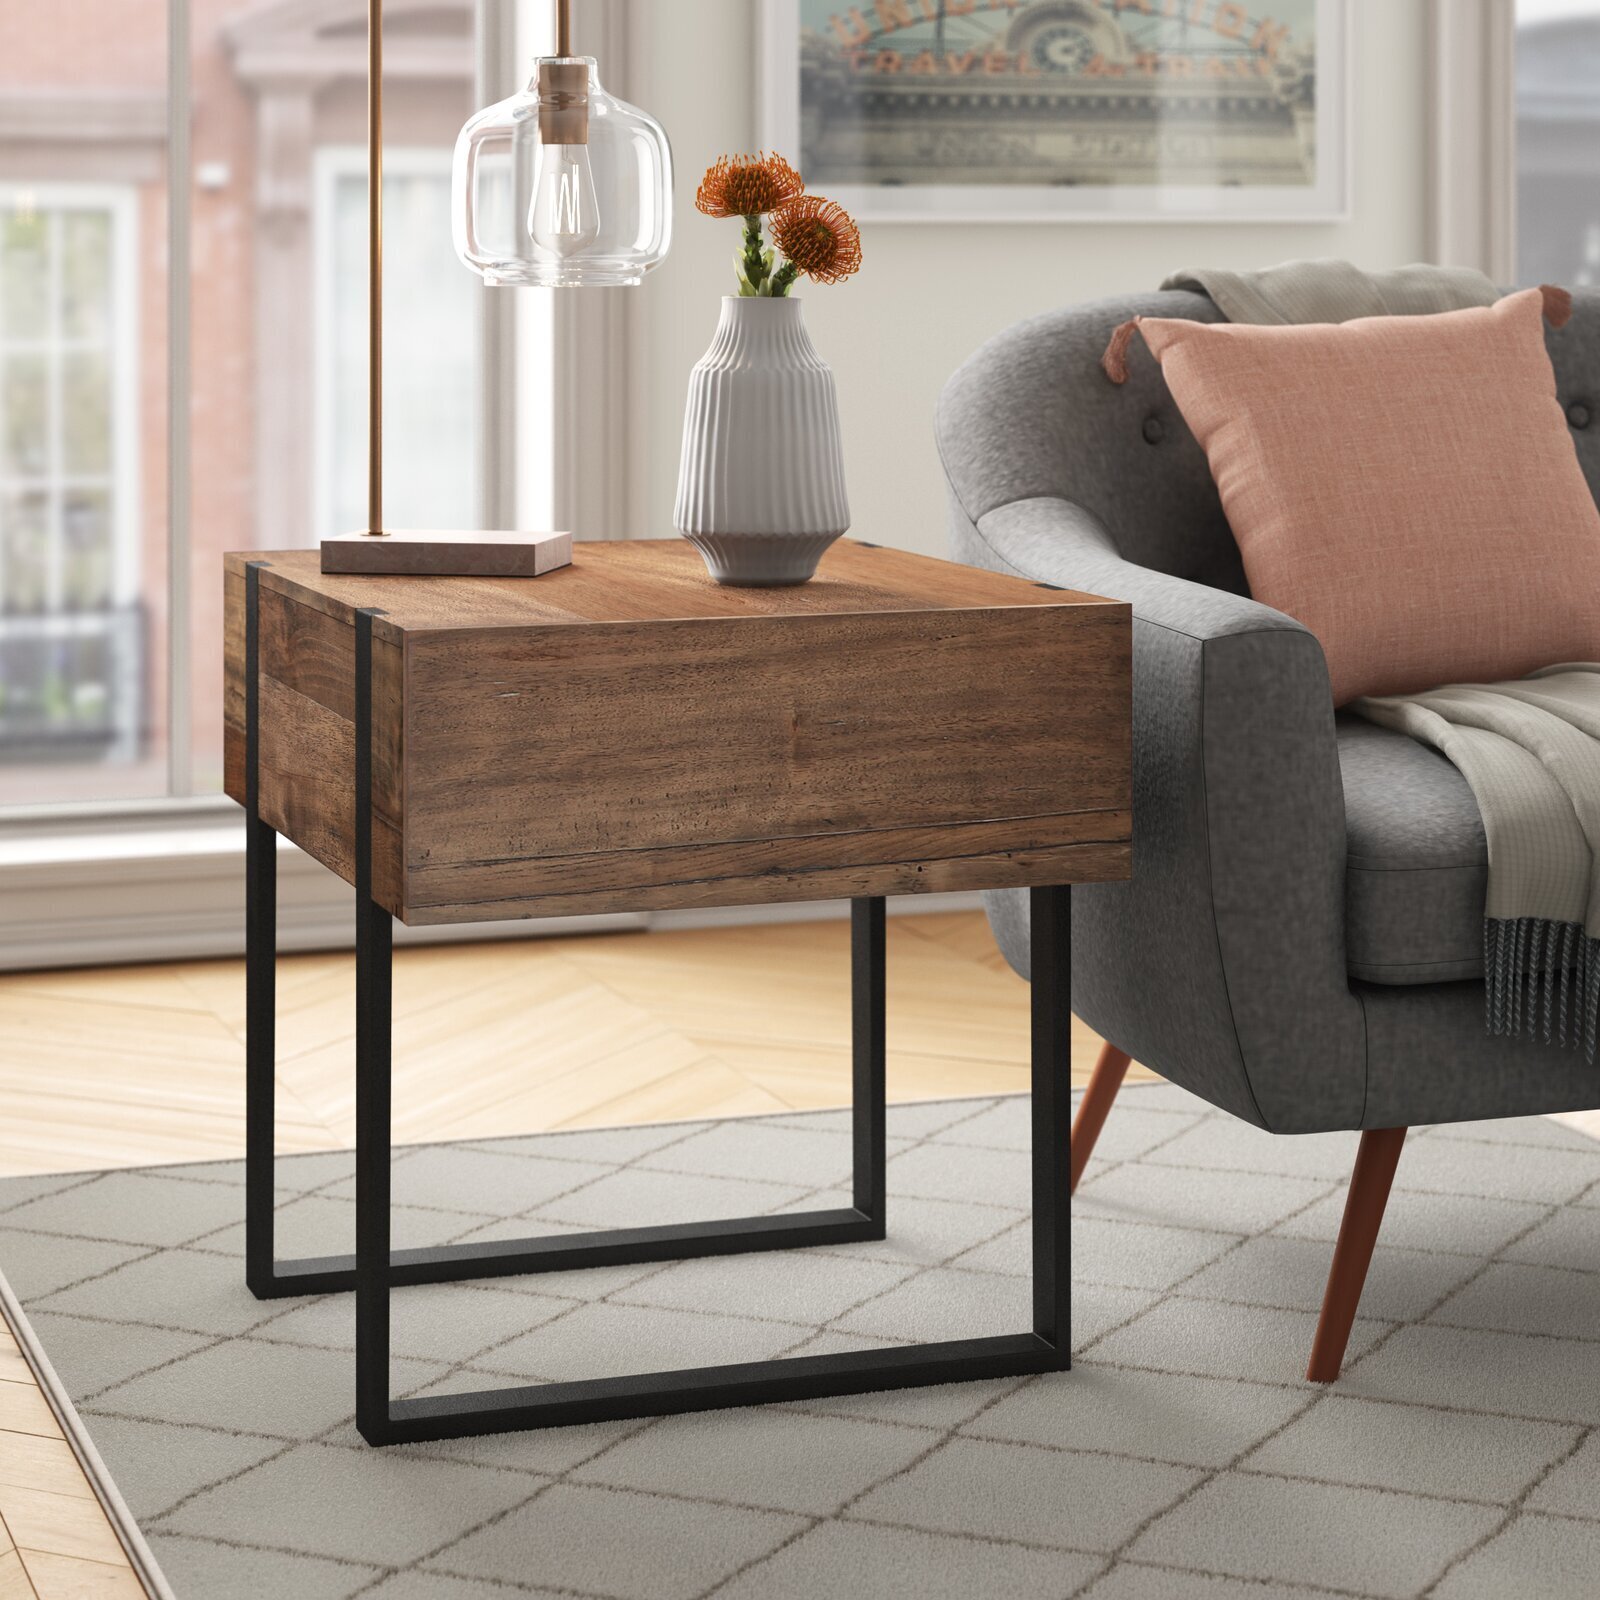 End Table Living Room Industrial End Table Modern End Table Wood Side Table Nesting Tables Wood End Table